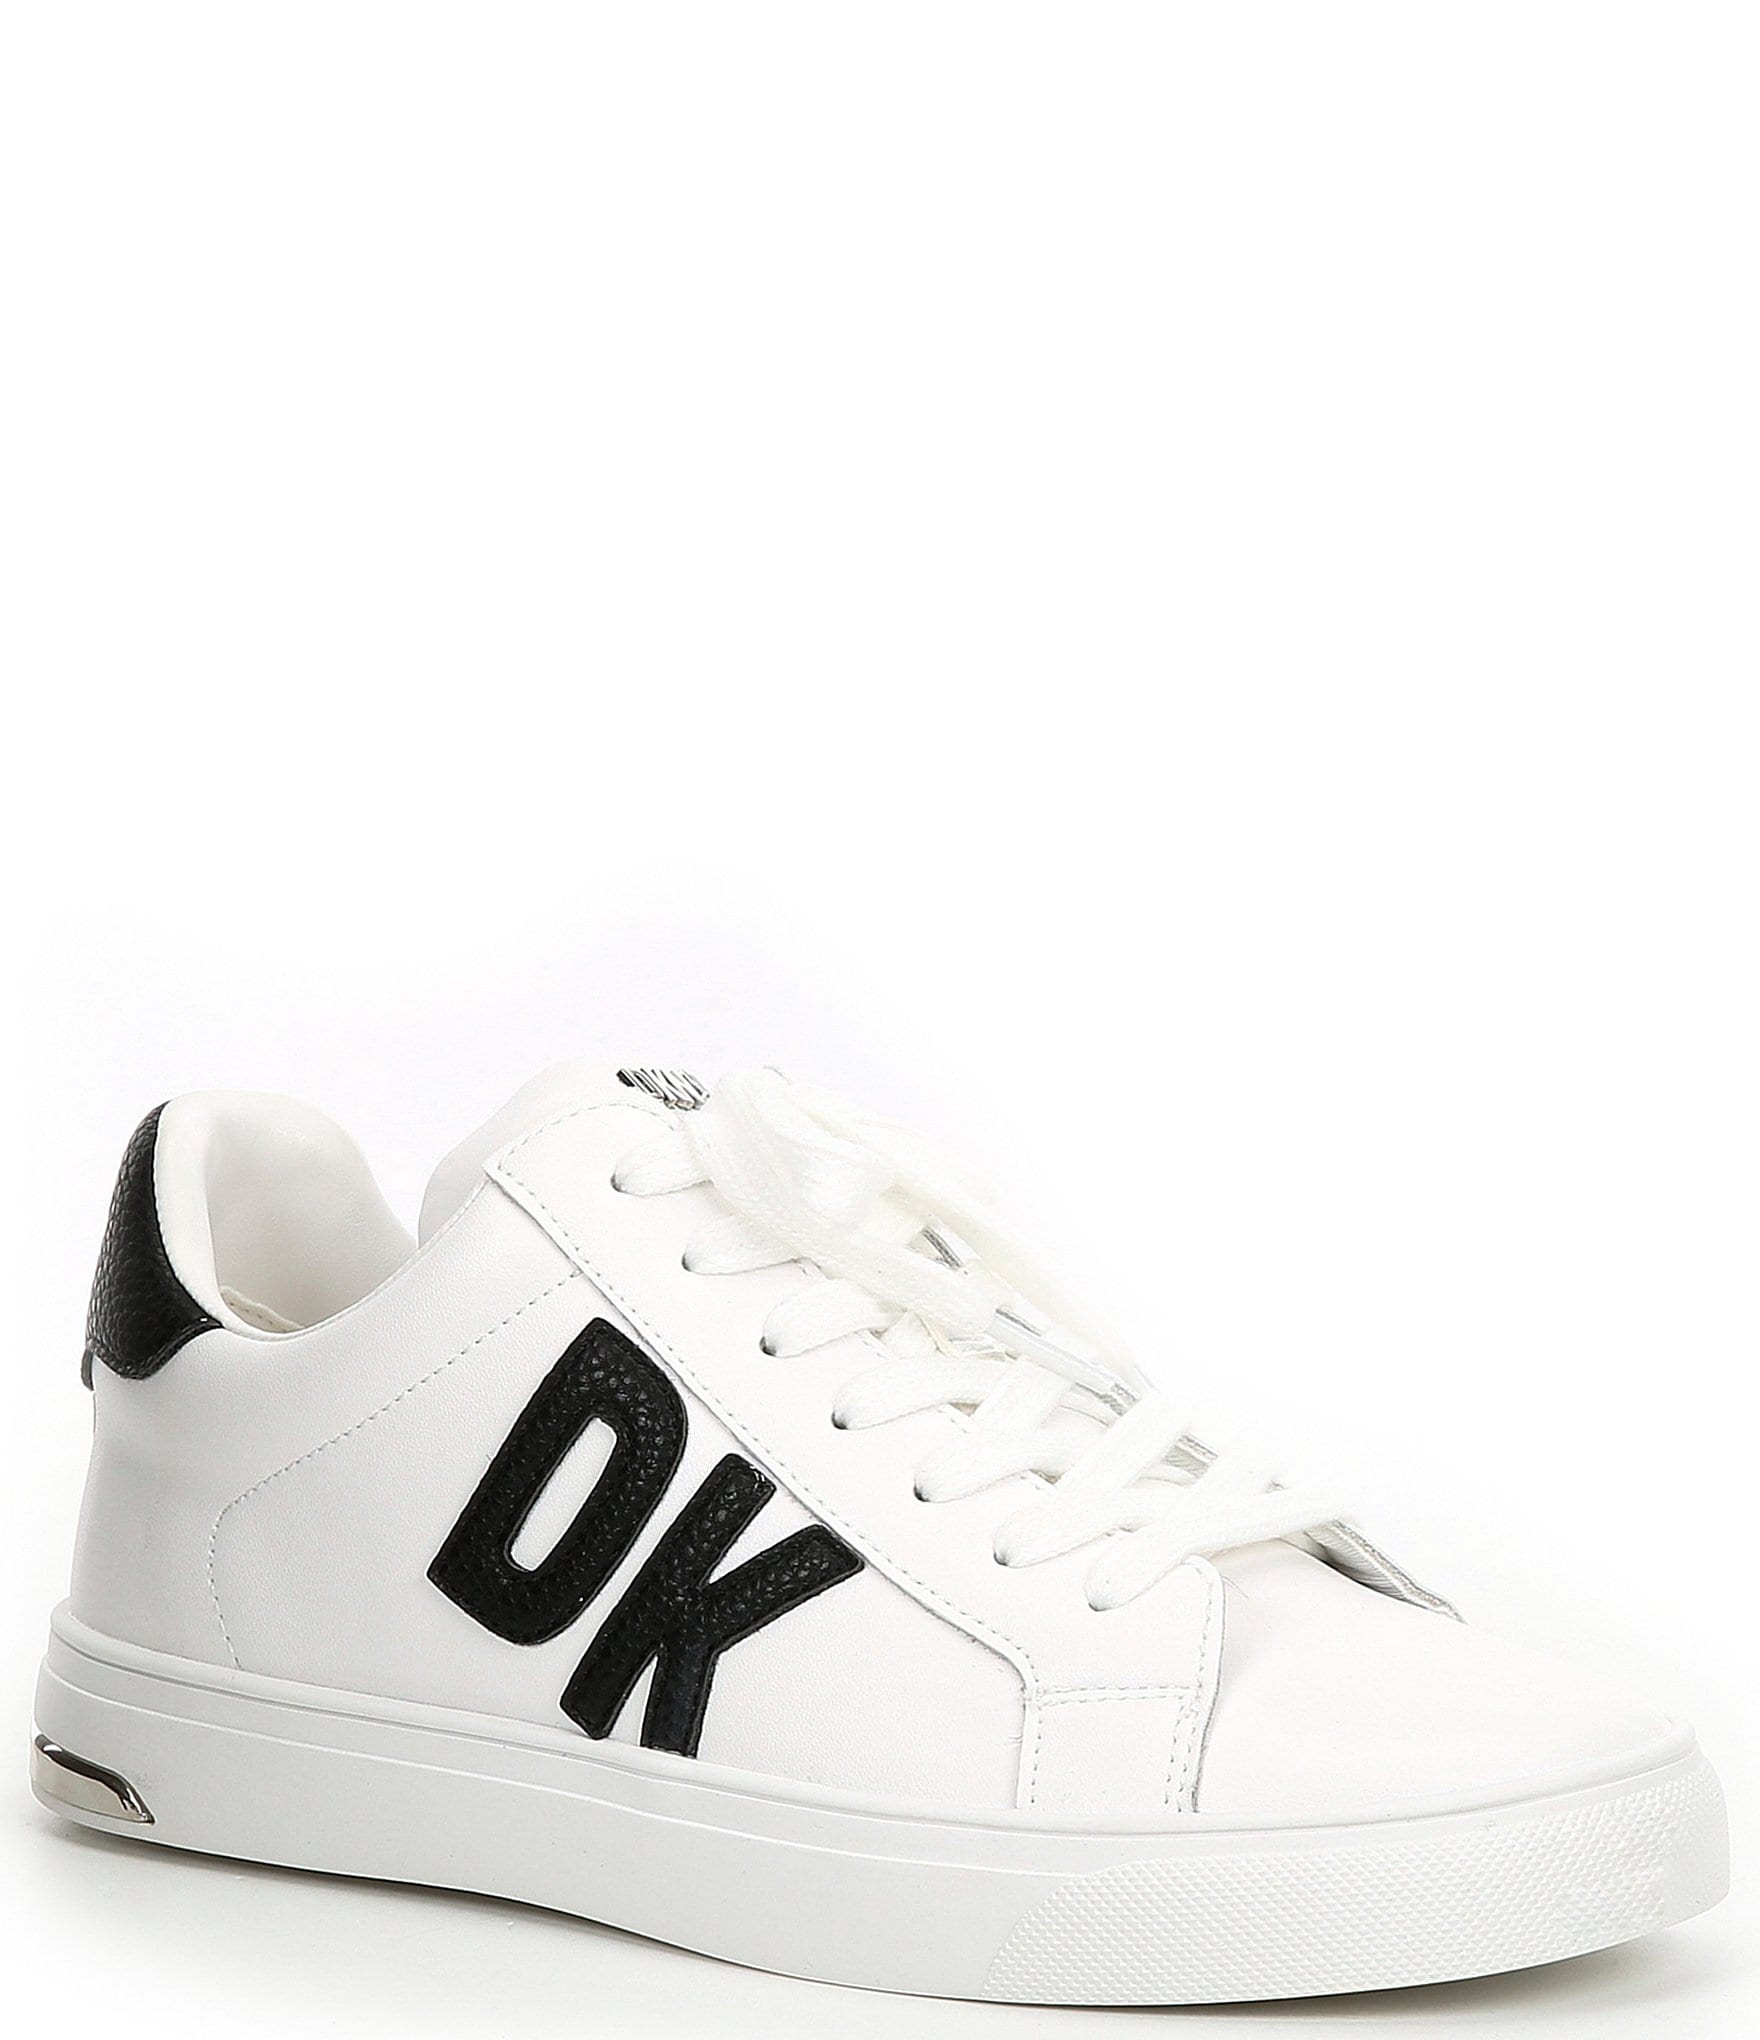 DKNY Abeni Lace-Up Leather Sneakers | Dillard's